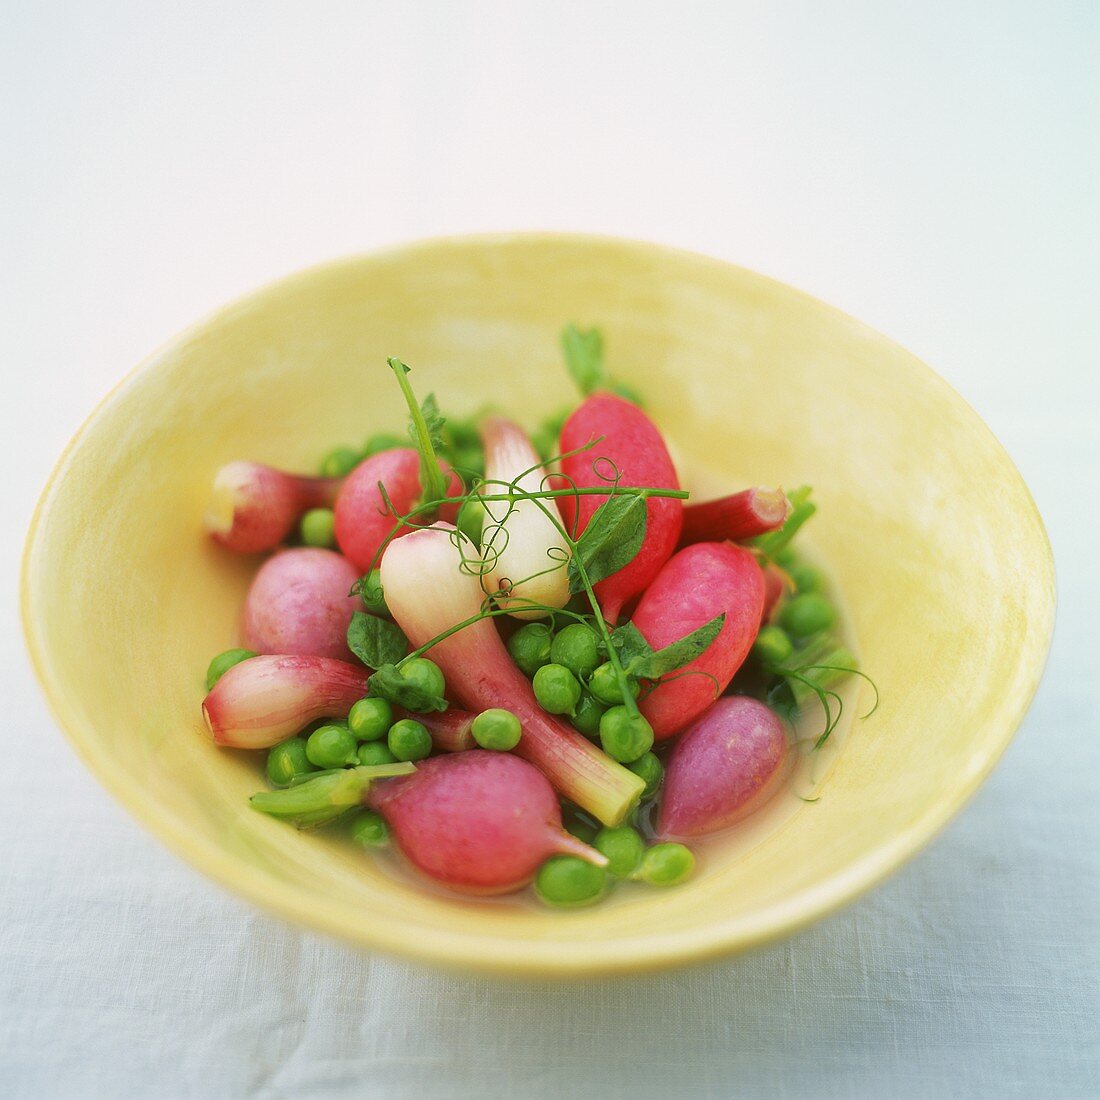 Pea and radish salad with spring onions